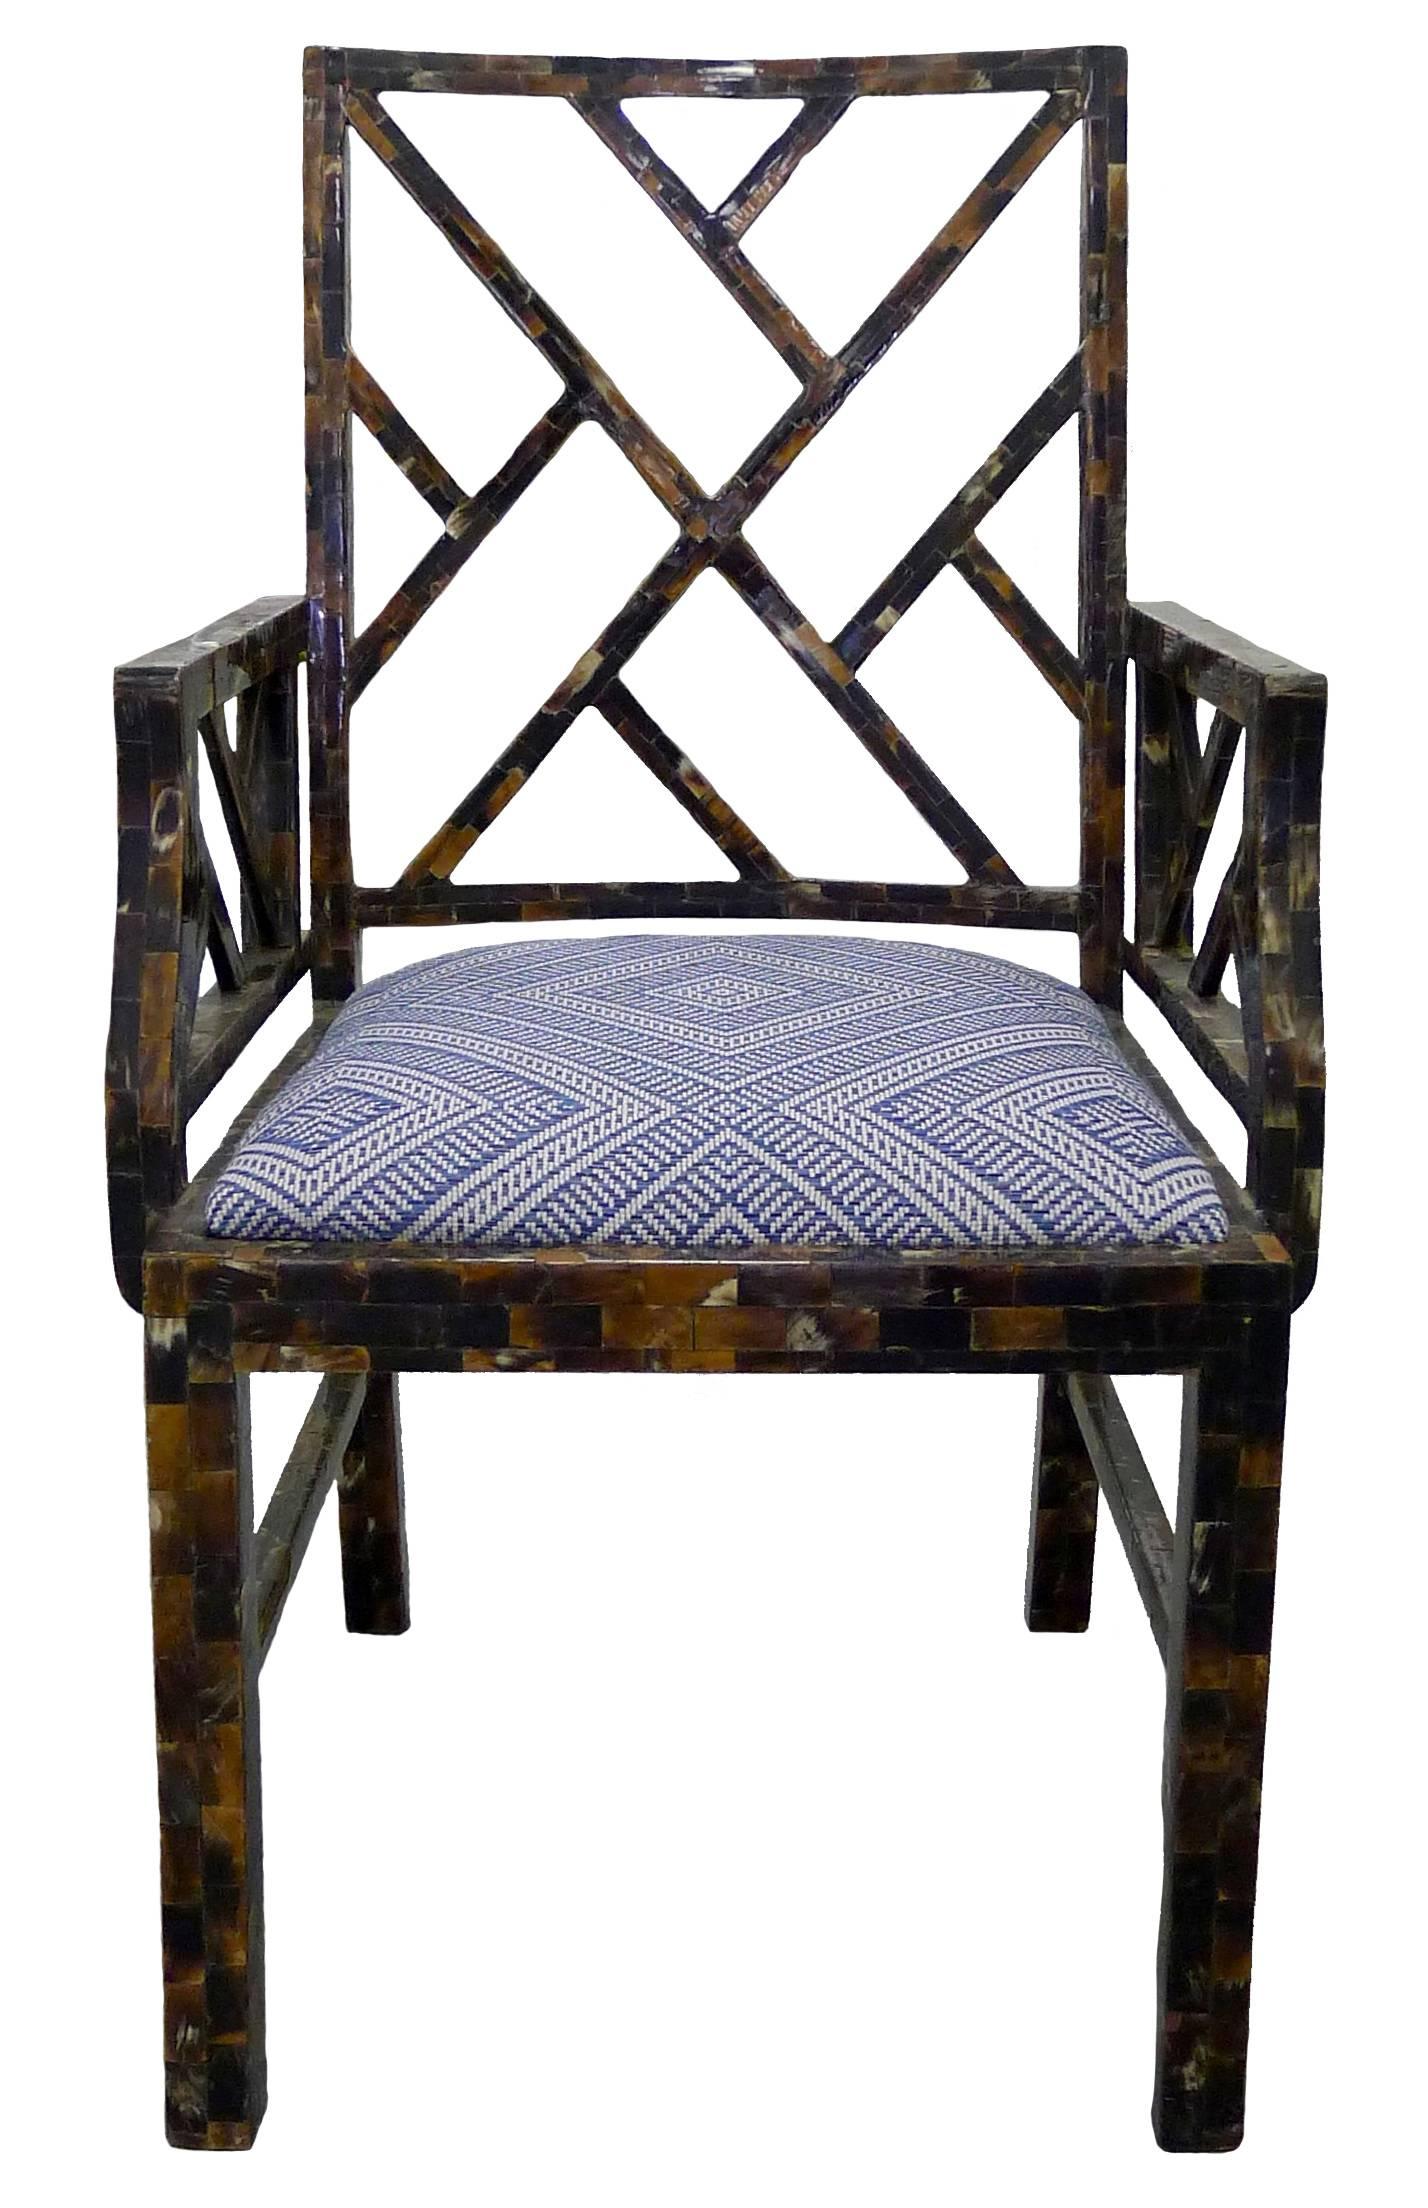 1970s Chinese Chippendale-style tessellated Horn armchair. Tiles of brown and bone-colored Horn over wooden chair frame. Curved back detailing. Stamped 